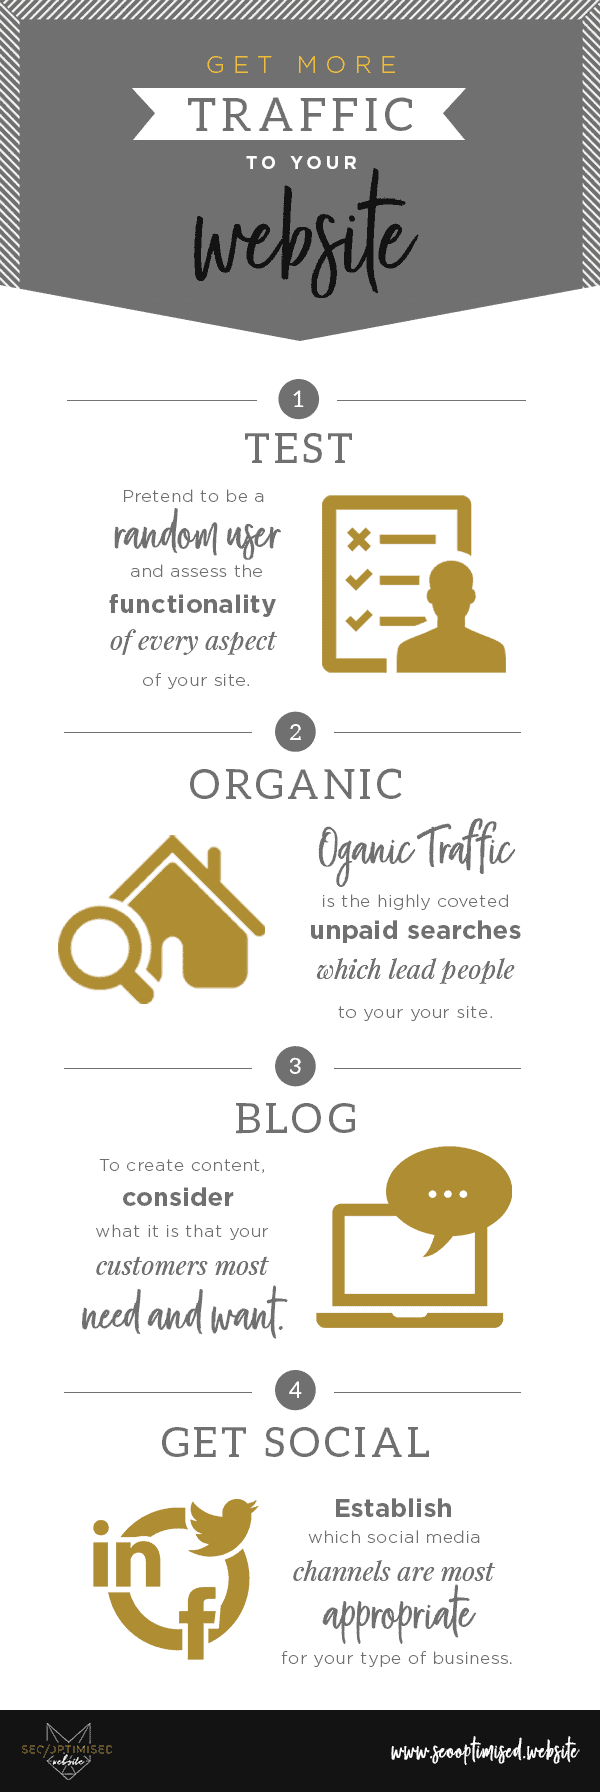 Get more traffic to your website infographic